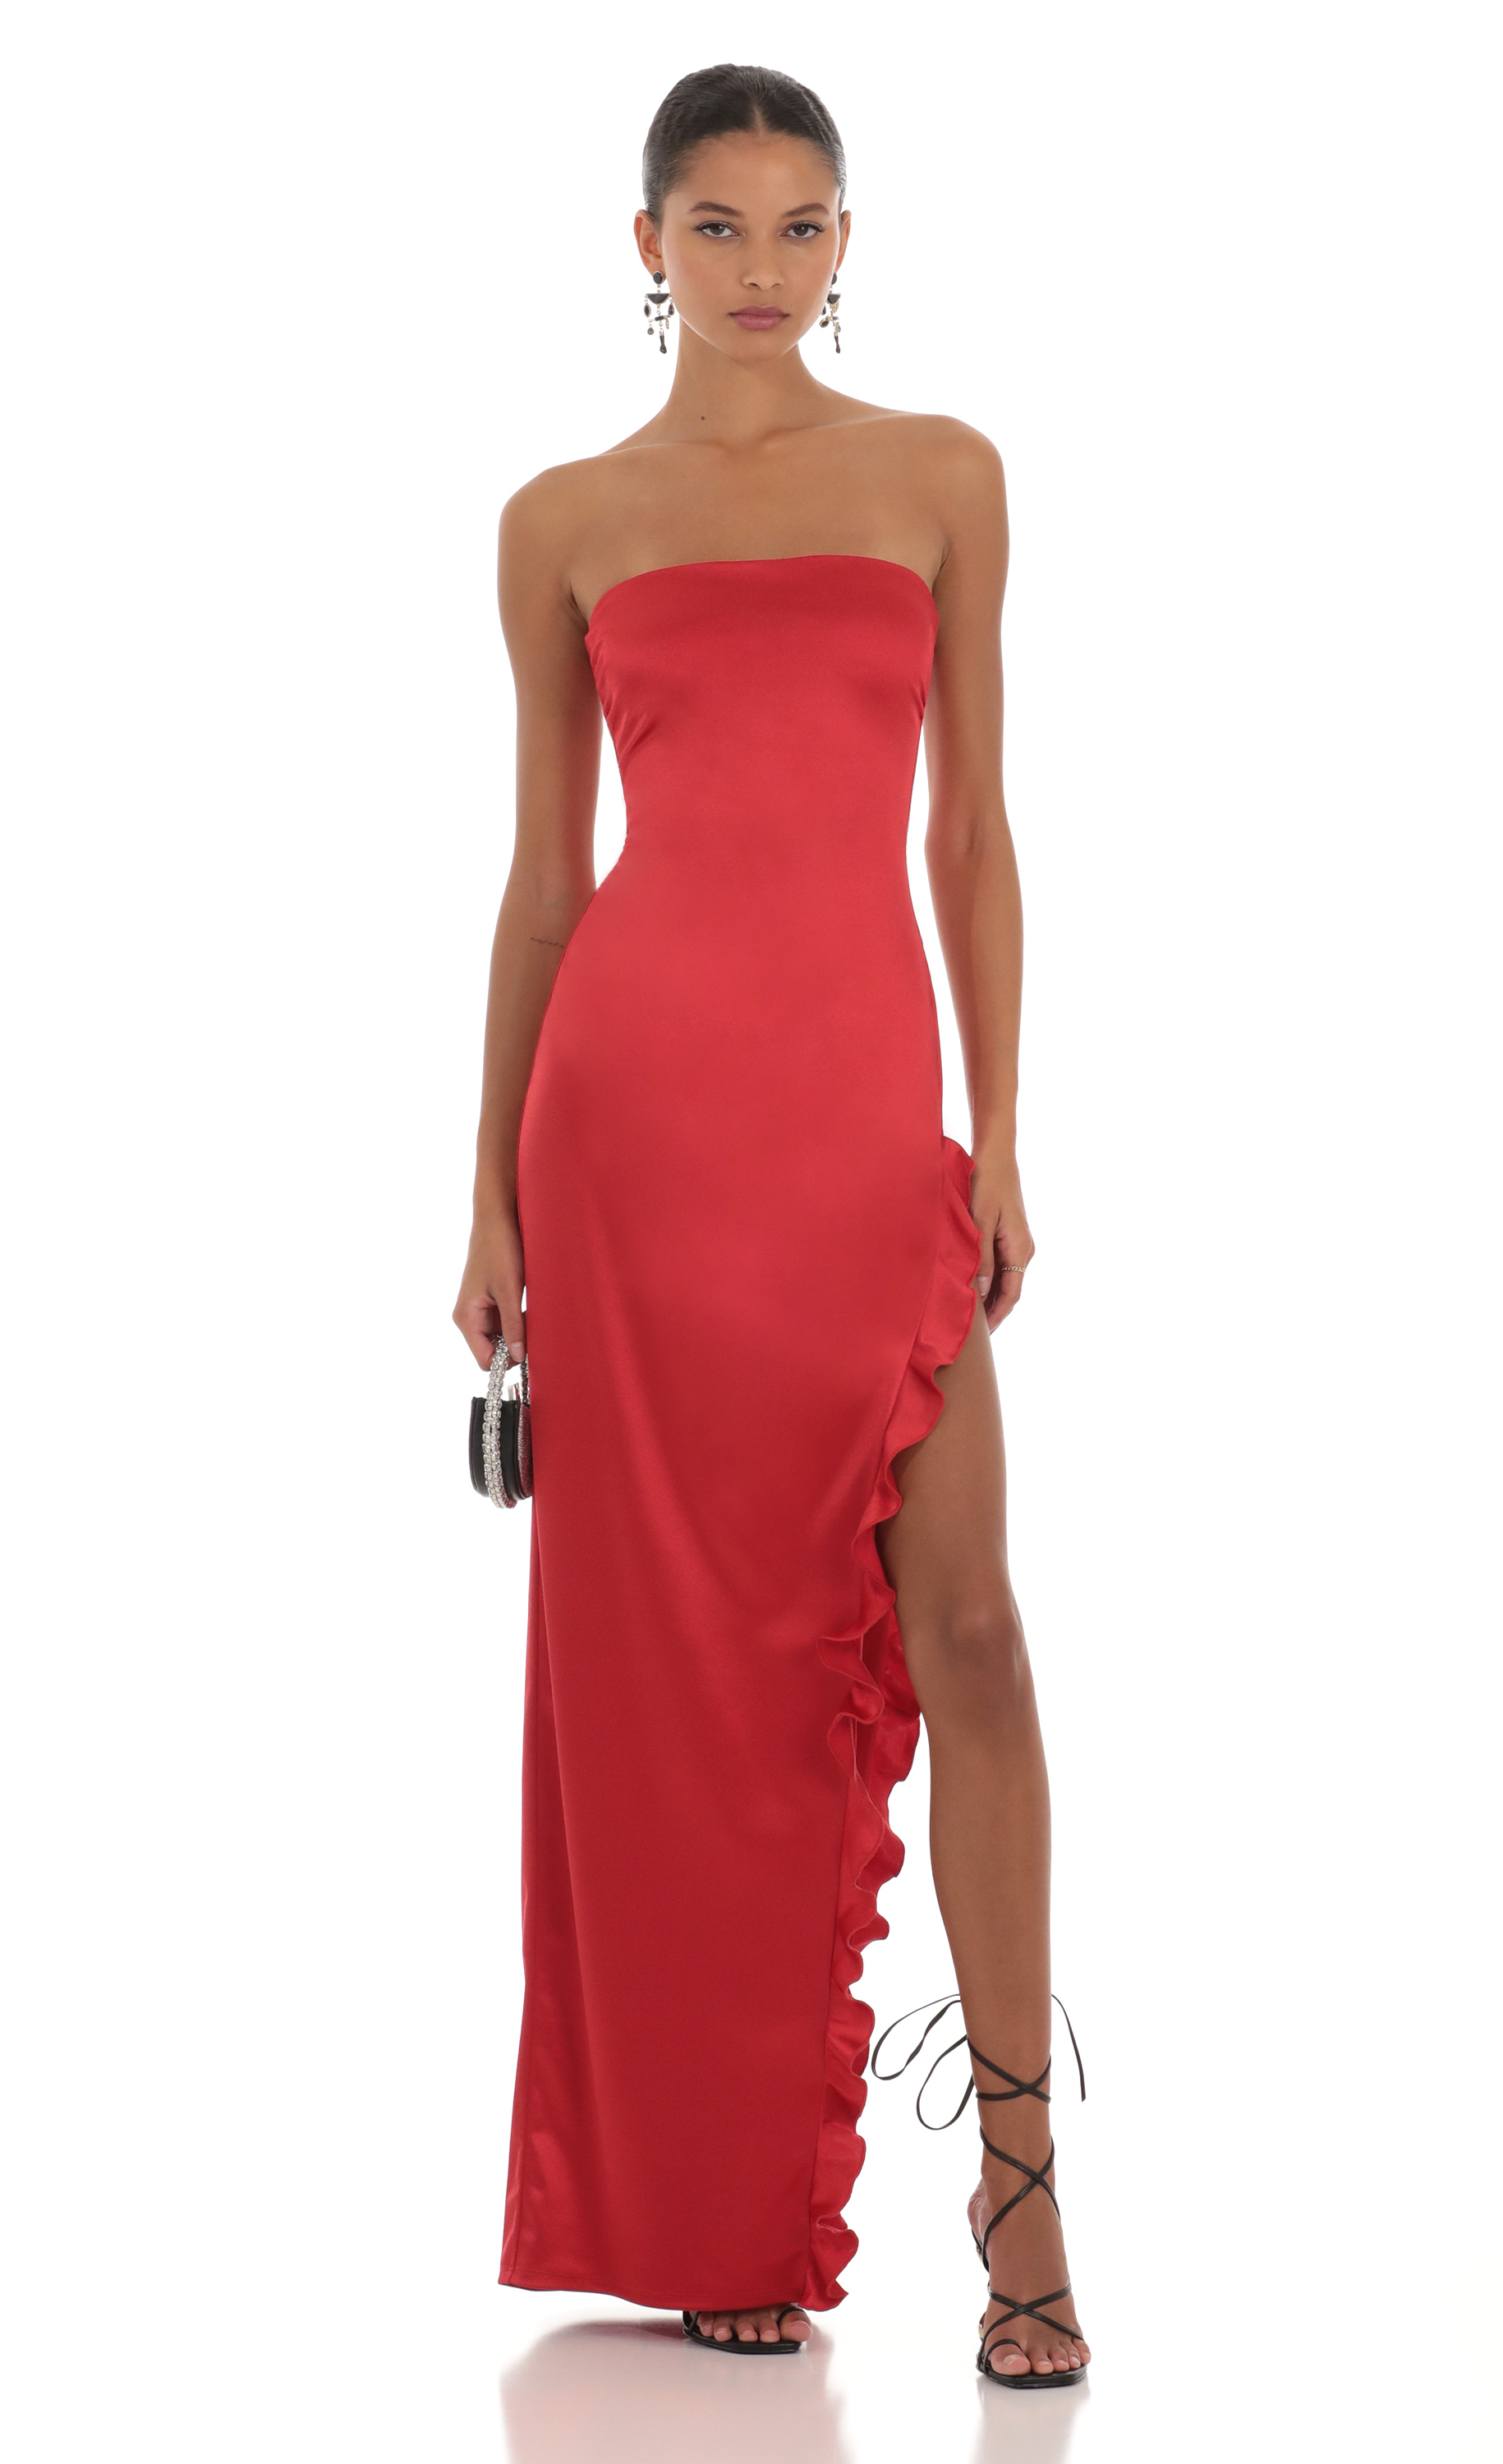 Satin Strapless Dress in Red